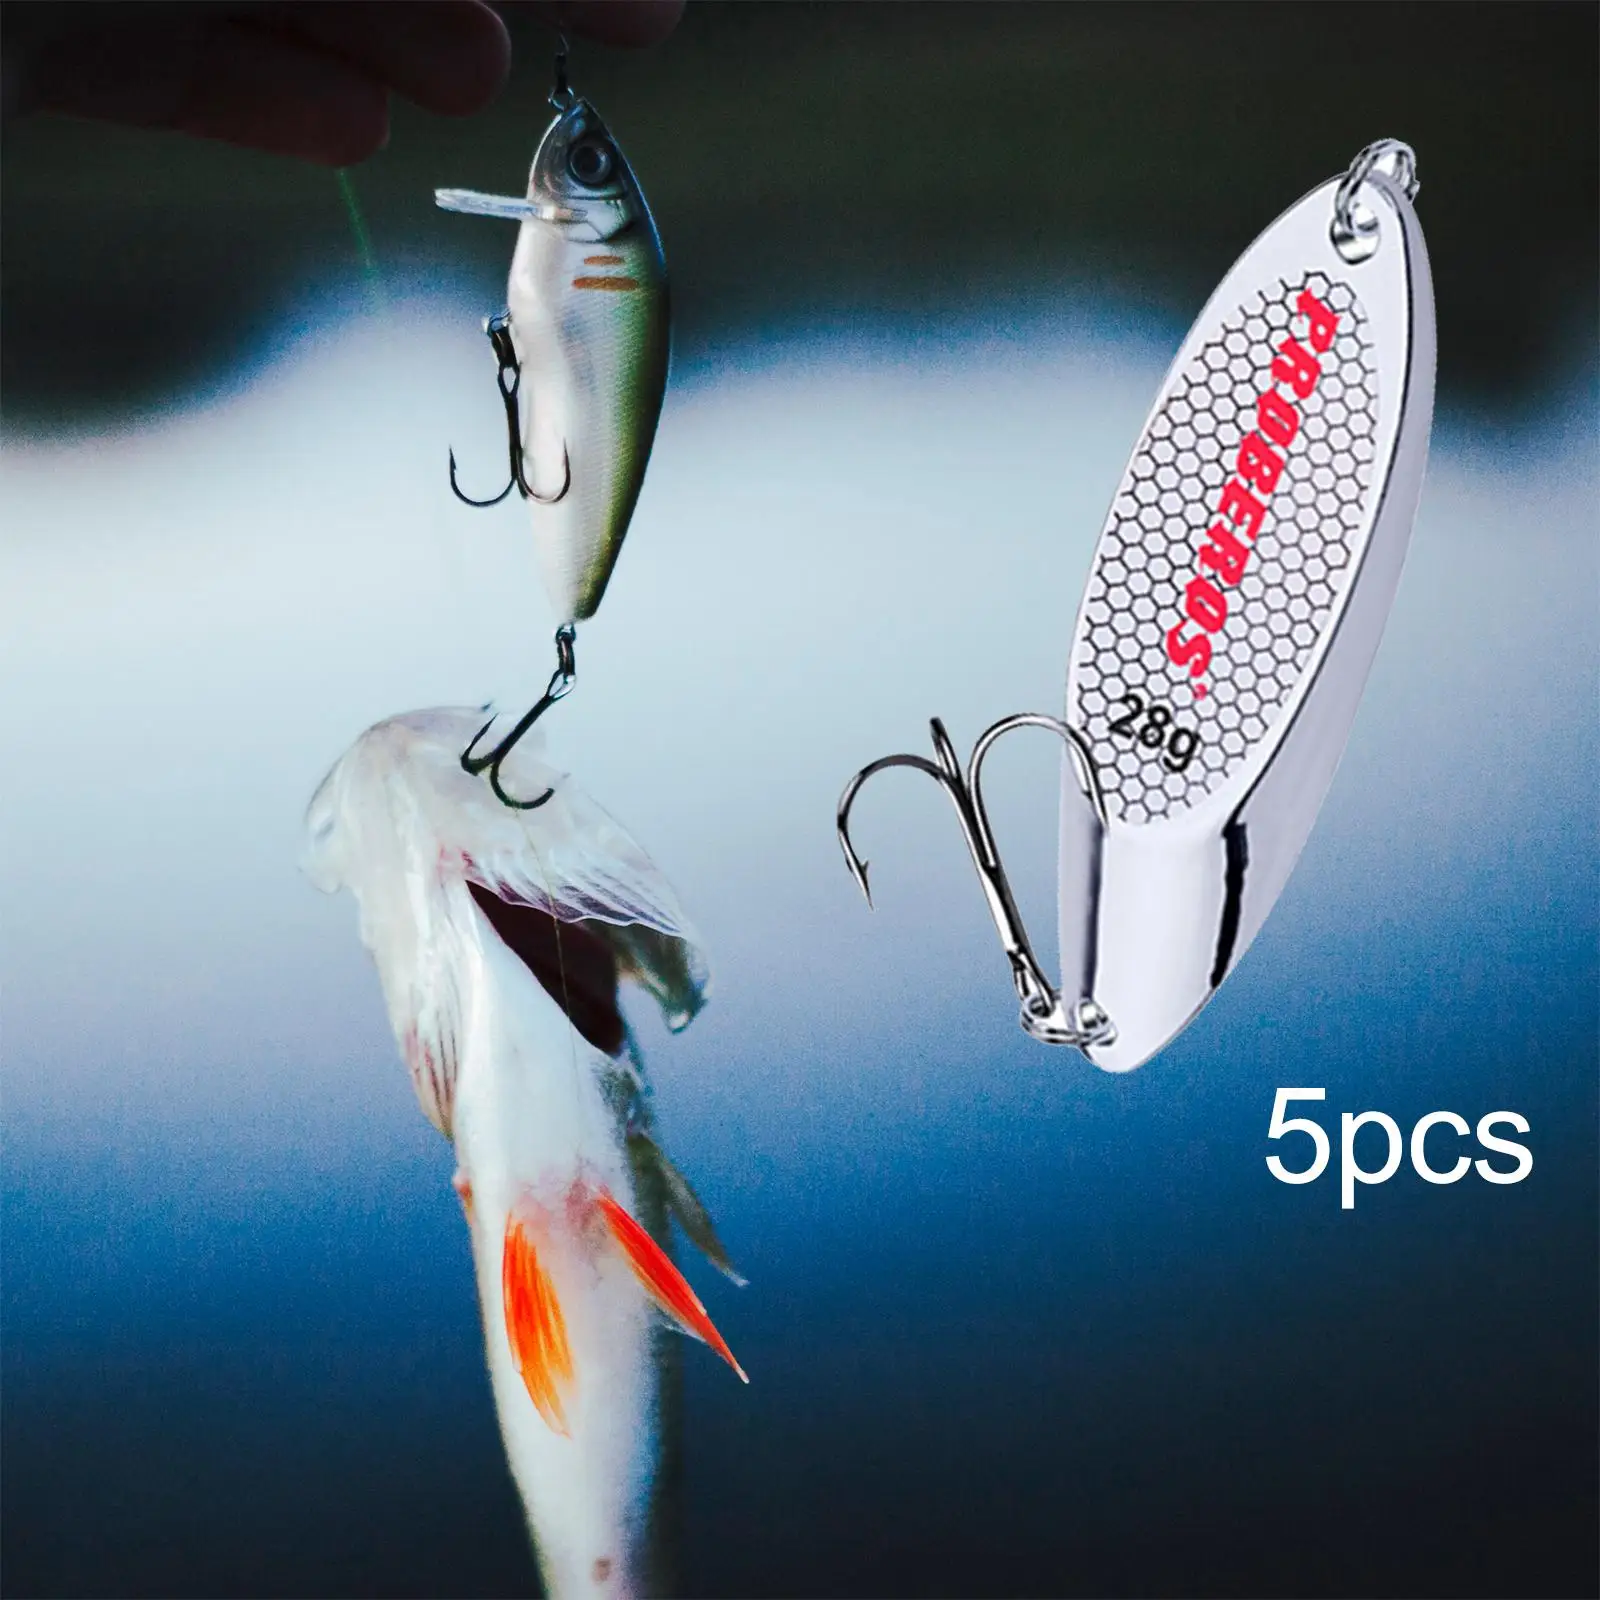 5 Pieces Fishing Spoons Lures Hard for Huge Distance Cast Bass Baits Fishing Baits for Pike Redfish Bass Trout Fishing Equipment